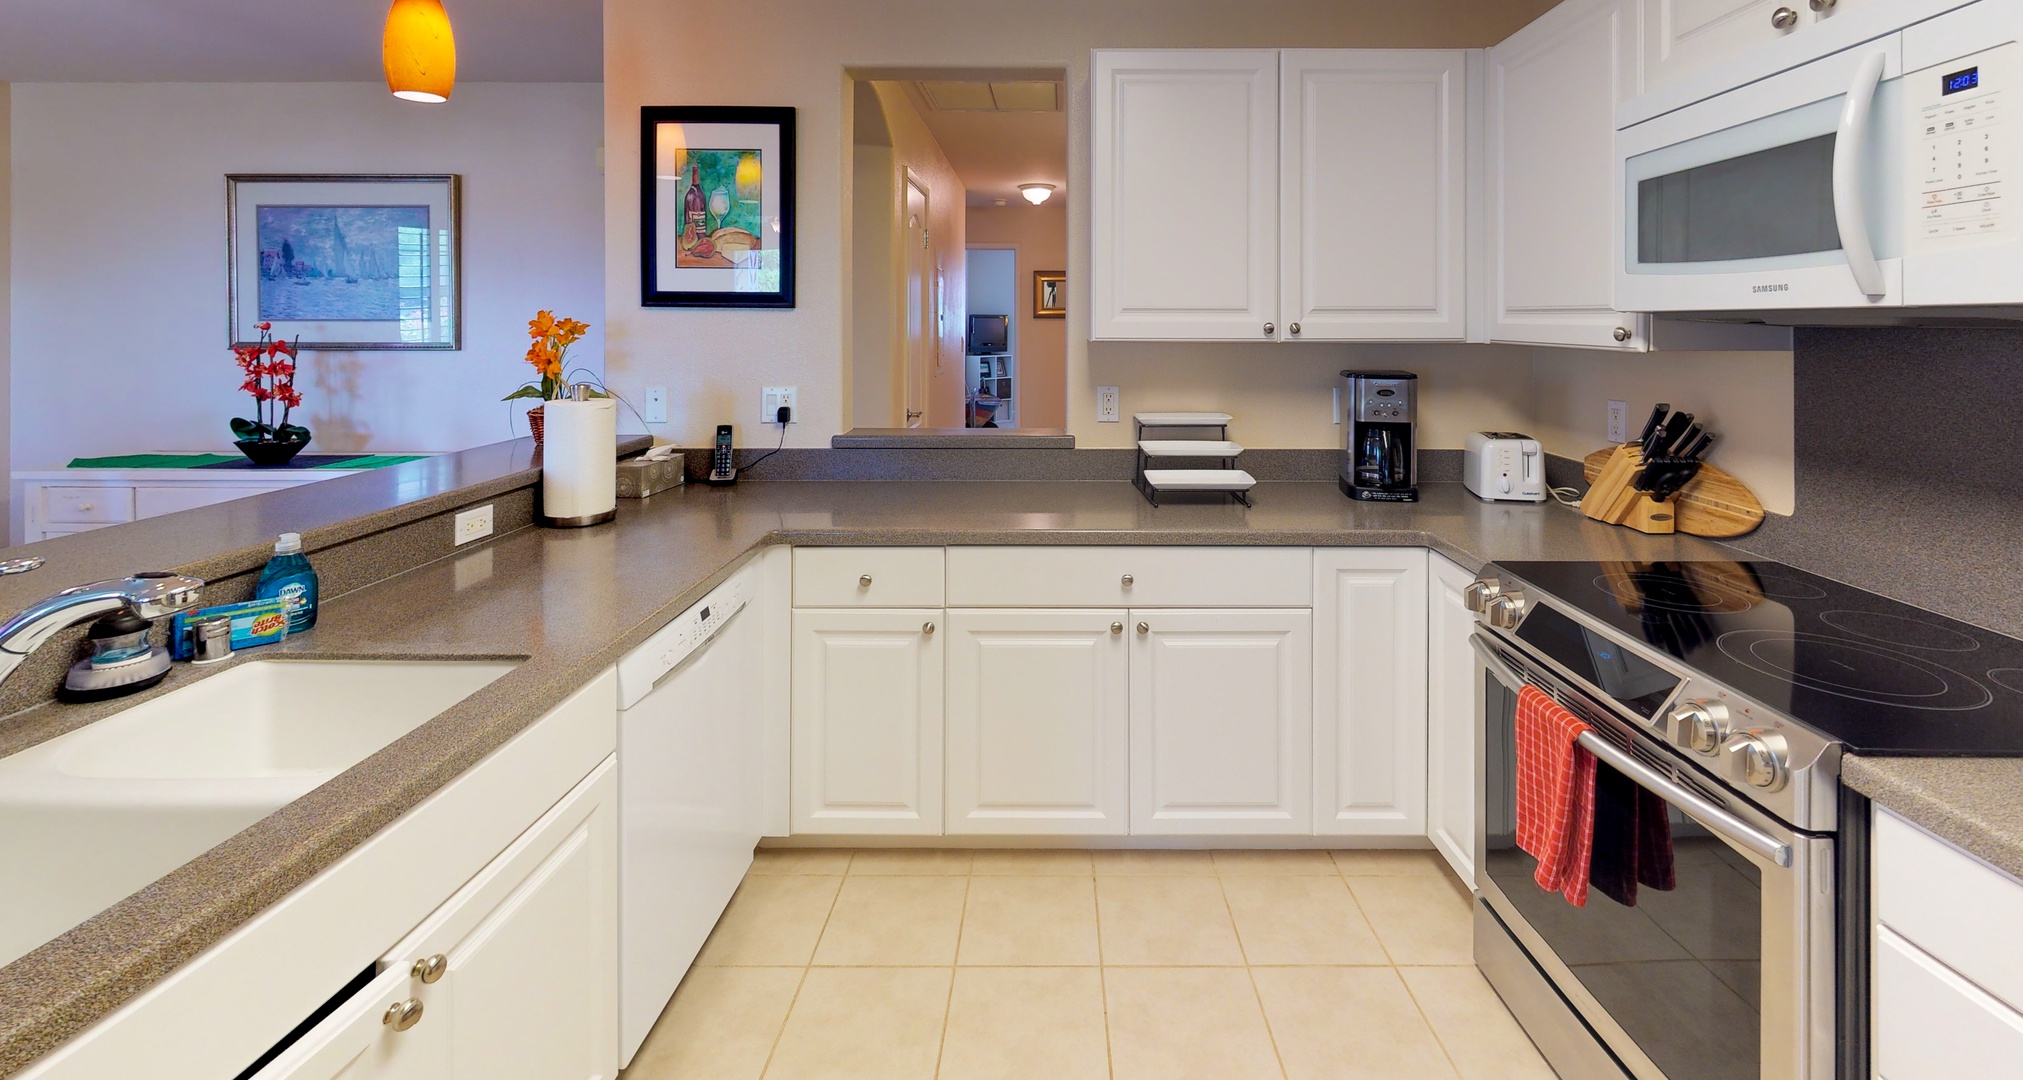 Kapolei Vacation Rentals, Ko Olina Kai 1065E - The fully equipped kitchen is ready for your culinary adventures.